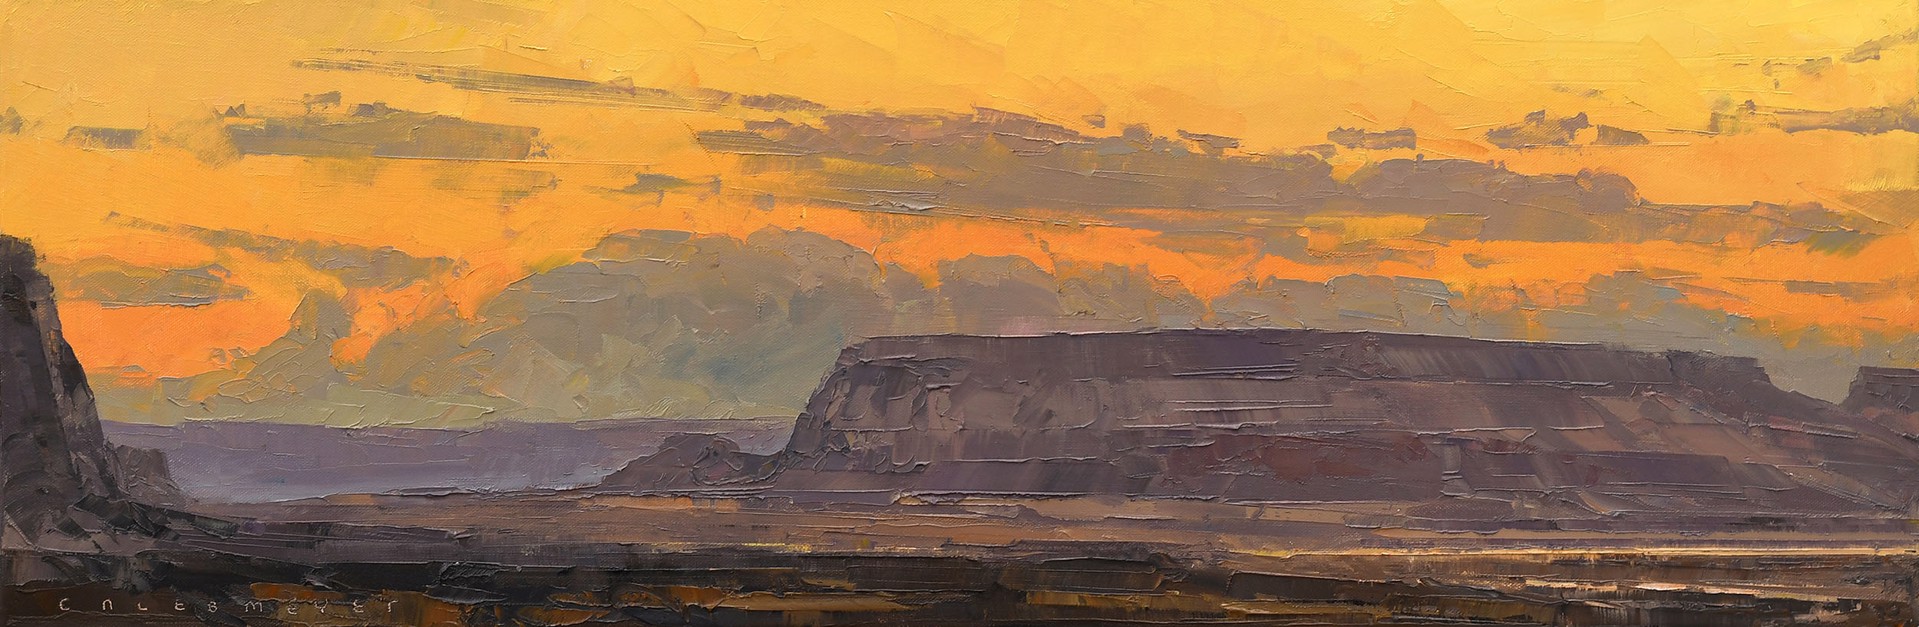 Original Landscape Painting By Caleb Meyer Featuring A Desert Plateau At Sunset